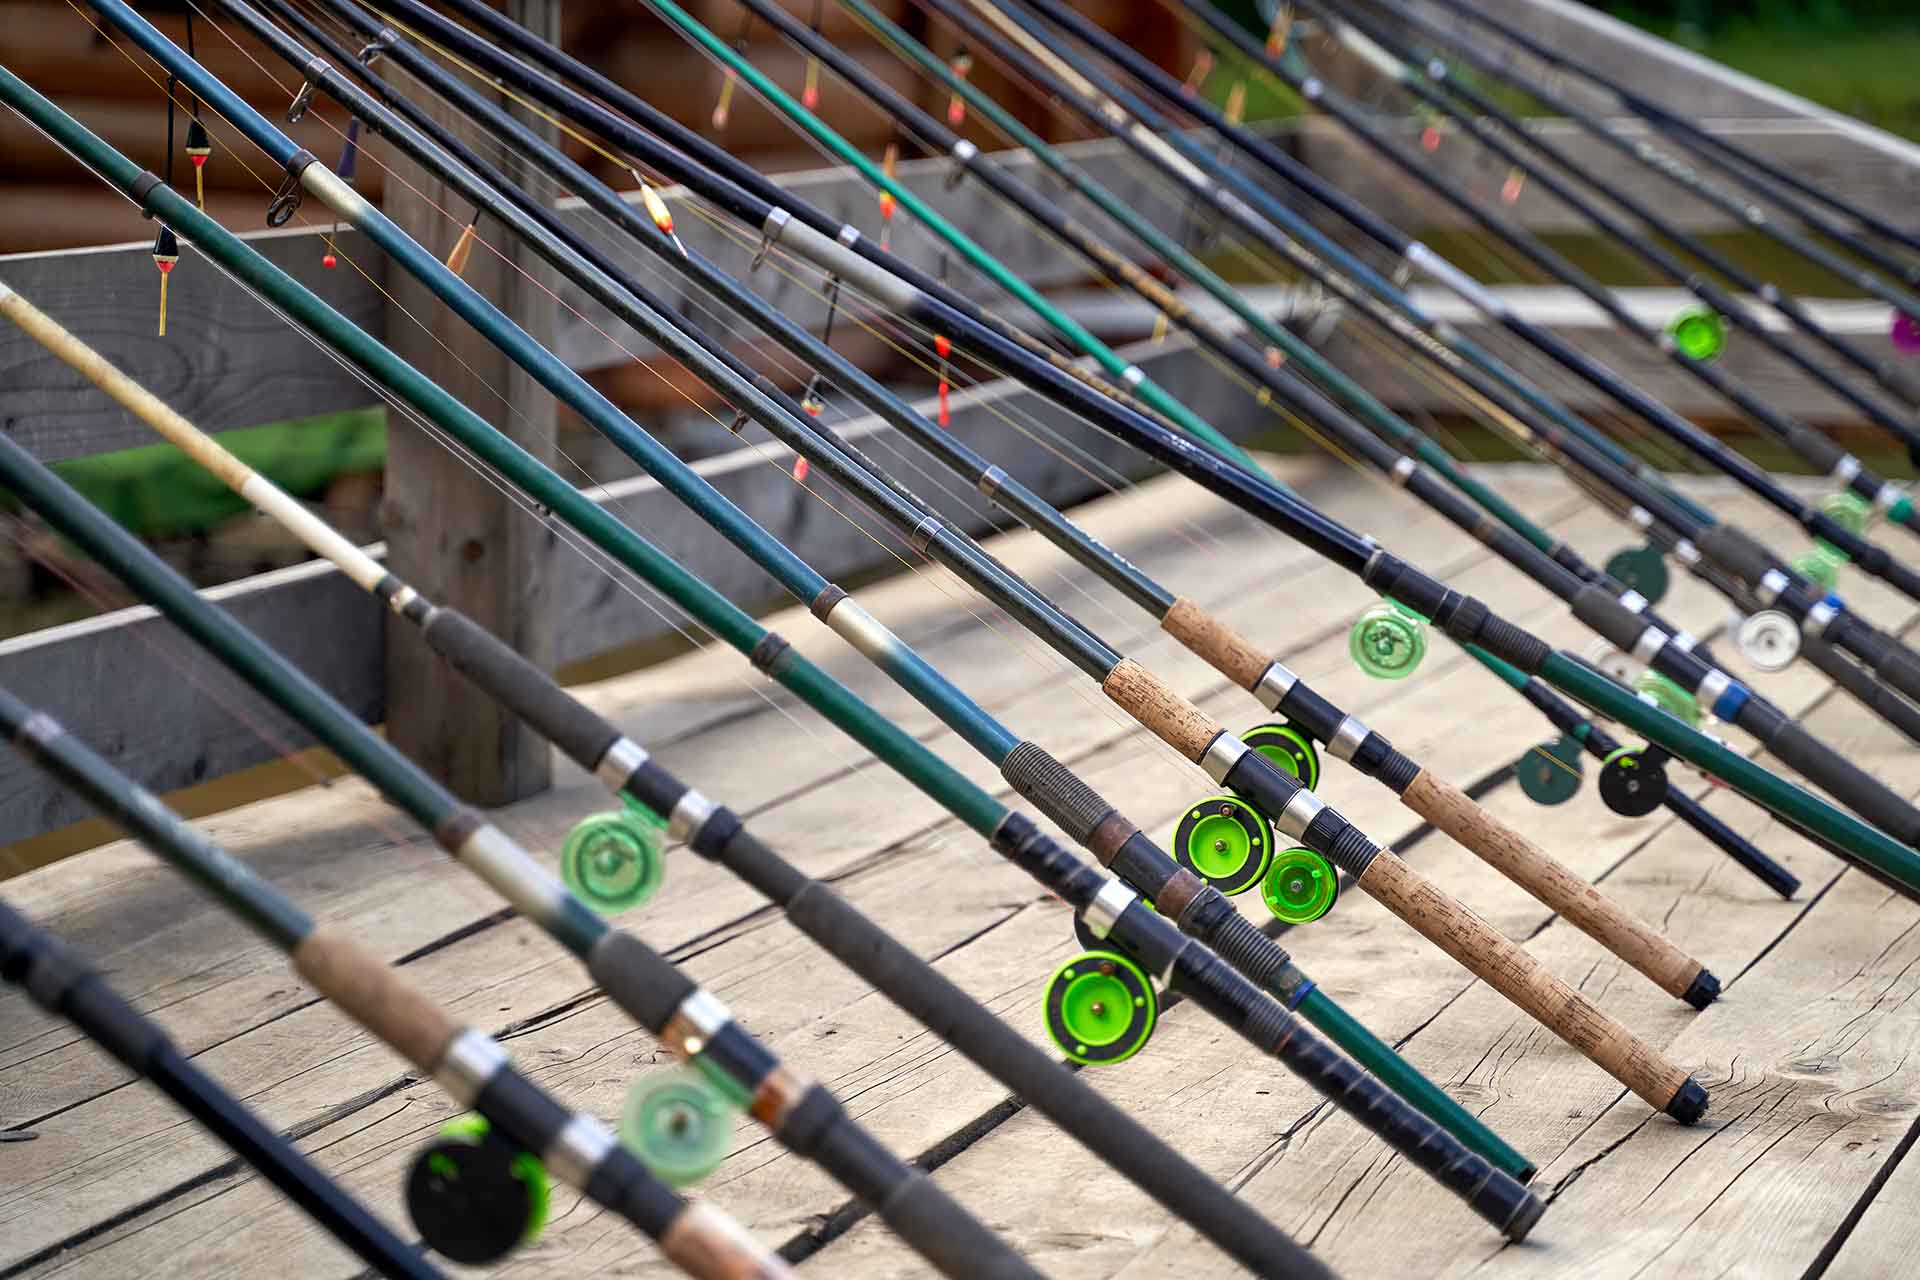 Many fishing rods on the wooden pier by the river or lake